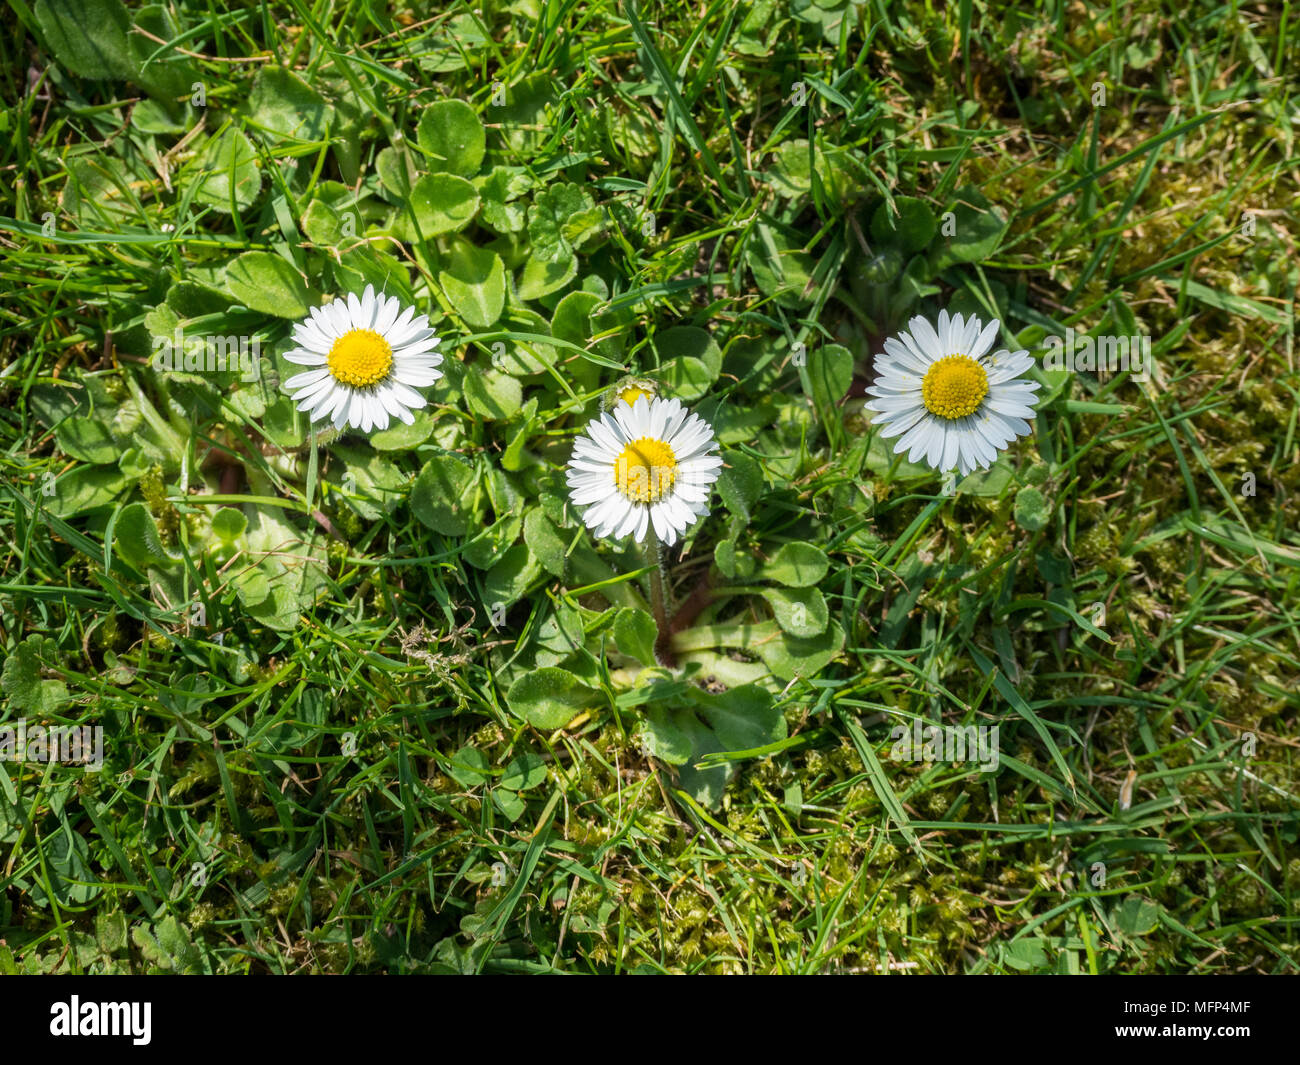 Three flowers of the common lawn weed Bellis perennis with floiage grwing in a lawn Stock Photo